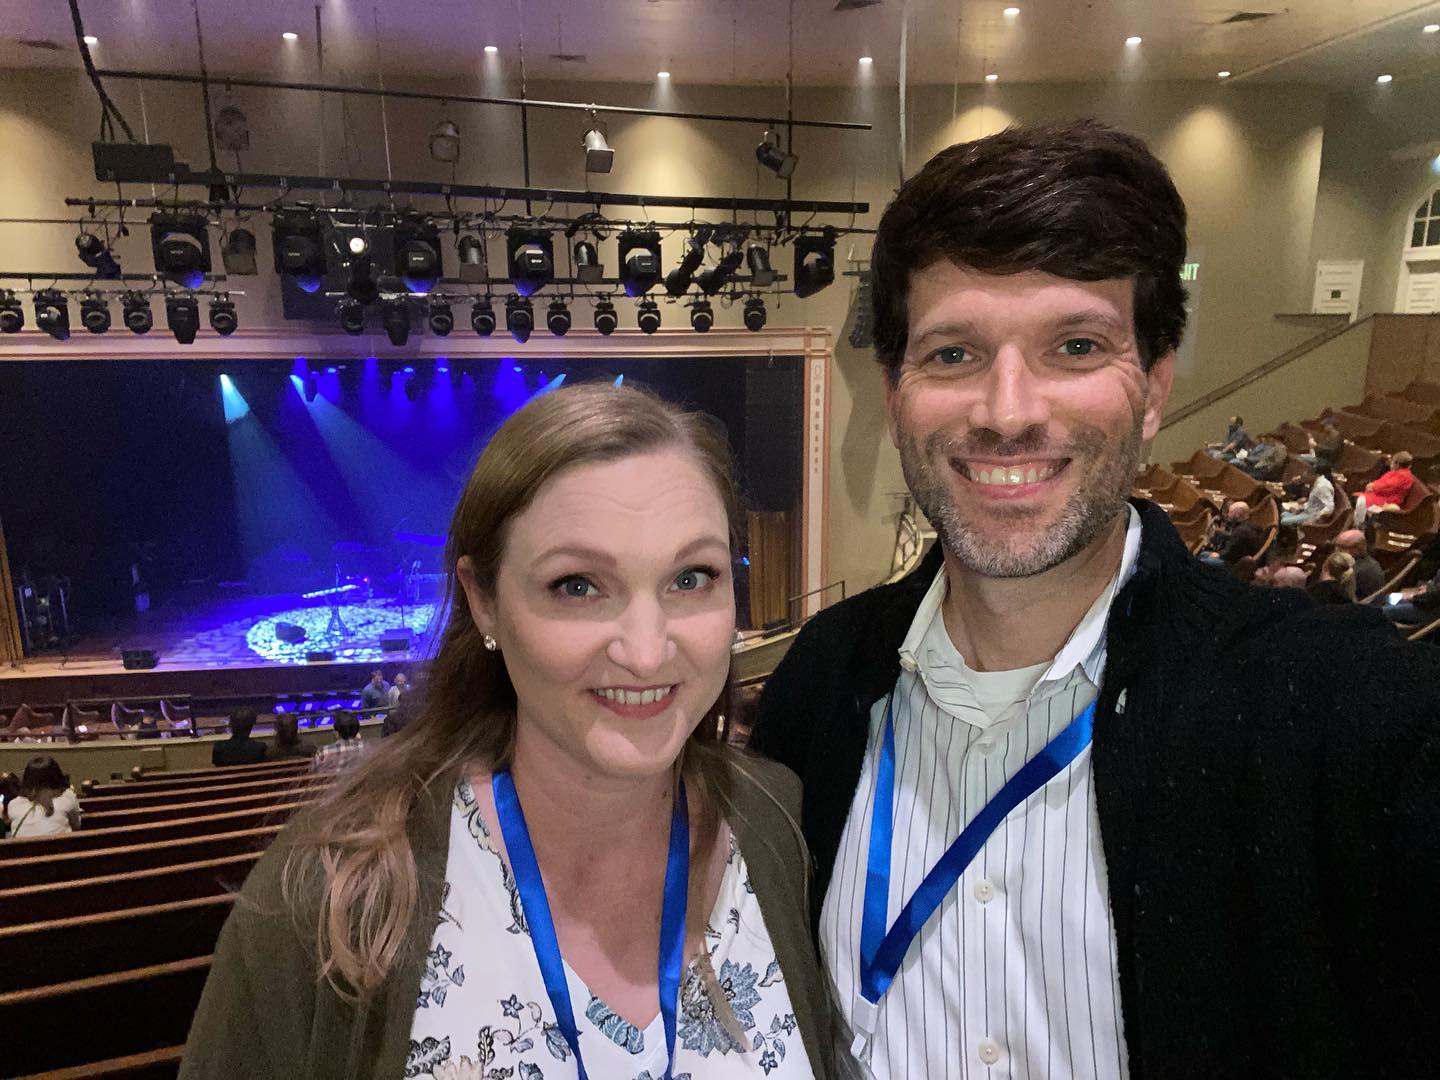 In my favorite room on a date with my beautiful bride to see Jason Isbell and the 400 Unit on the 7th night of their 8-night Ryman residency. I think this is my 5th time to see them at the Ryman and Olivia’s 1st.